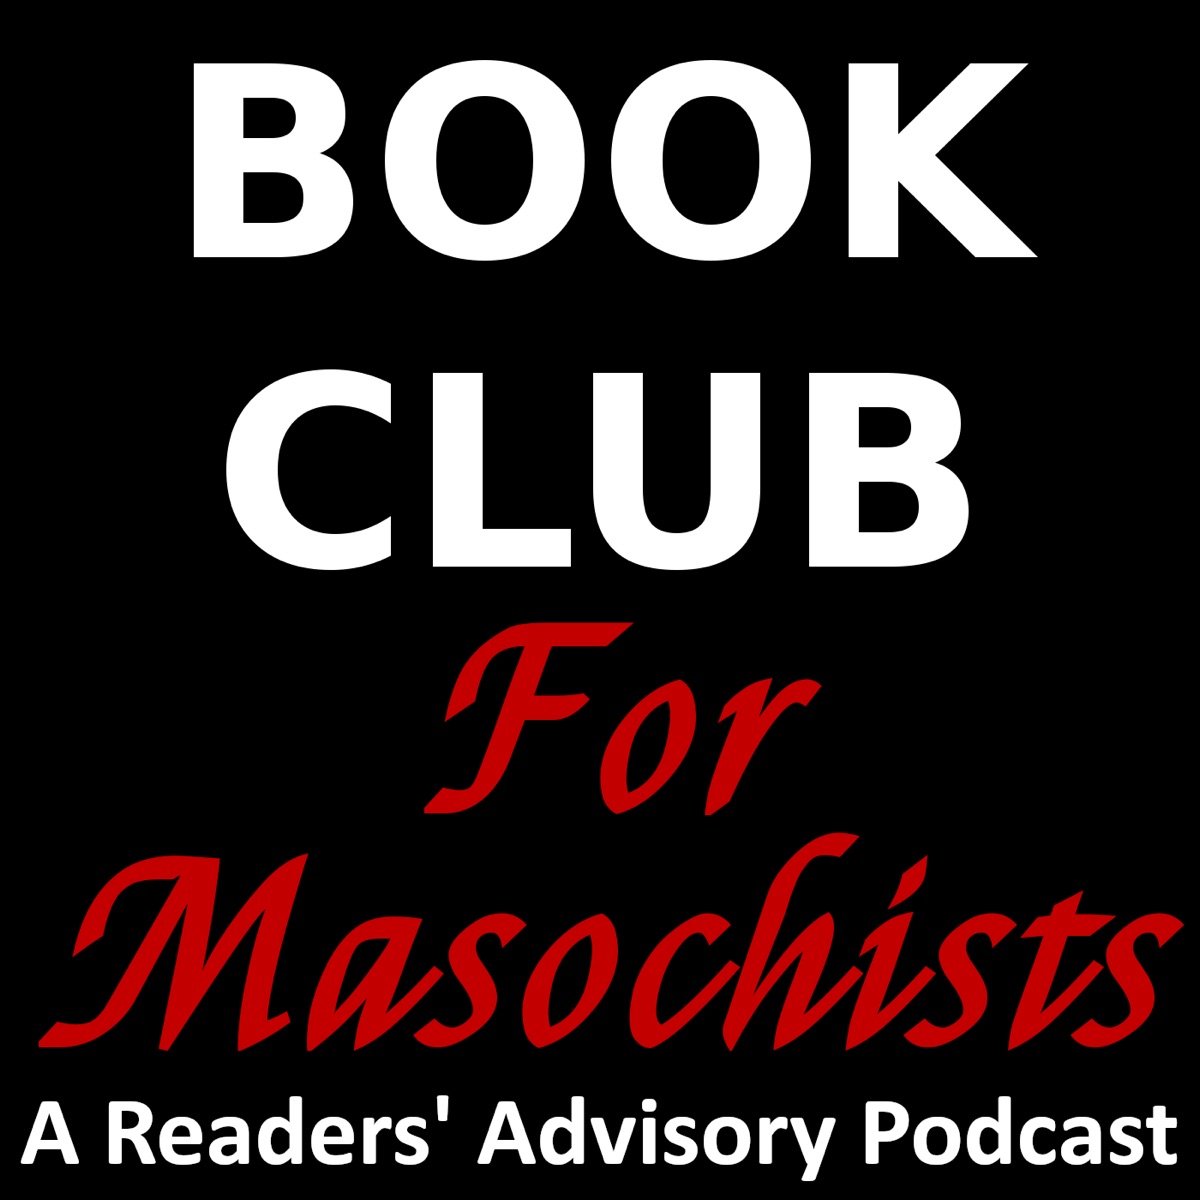 Book Club for Masochists: a Readers' Advisory Podcast - Podcast